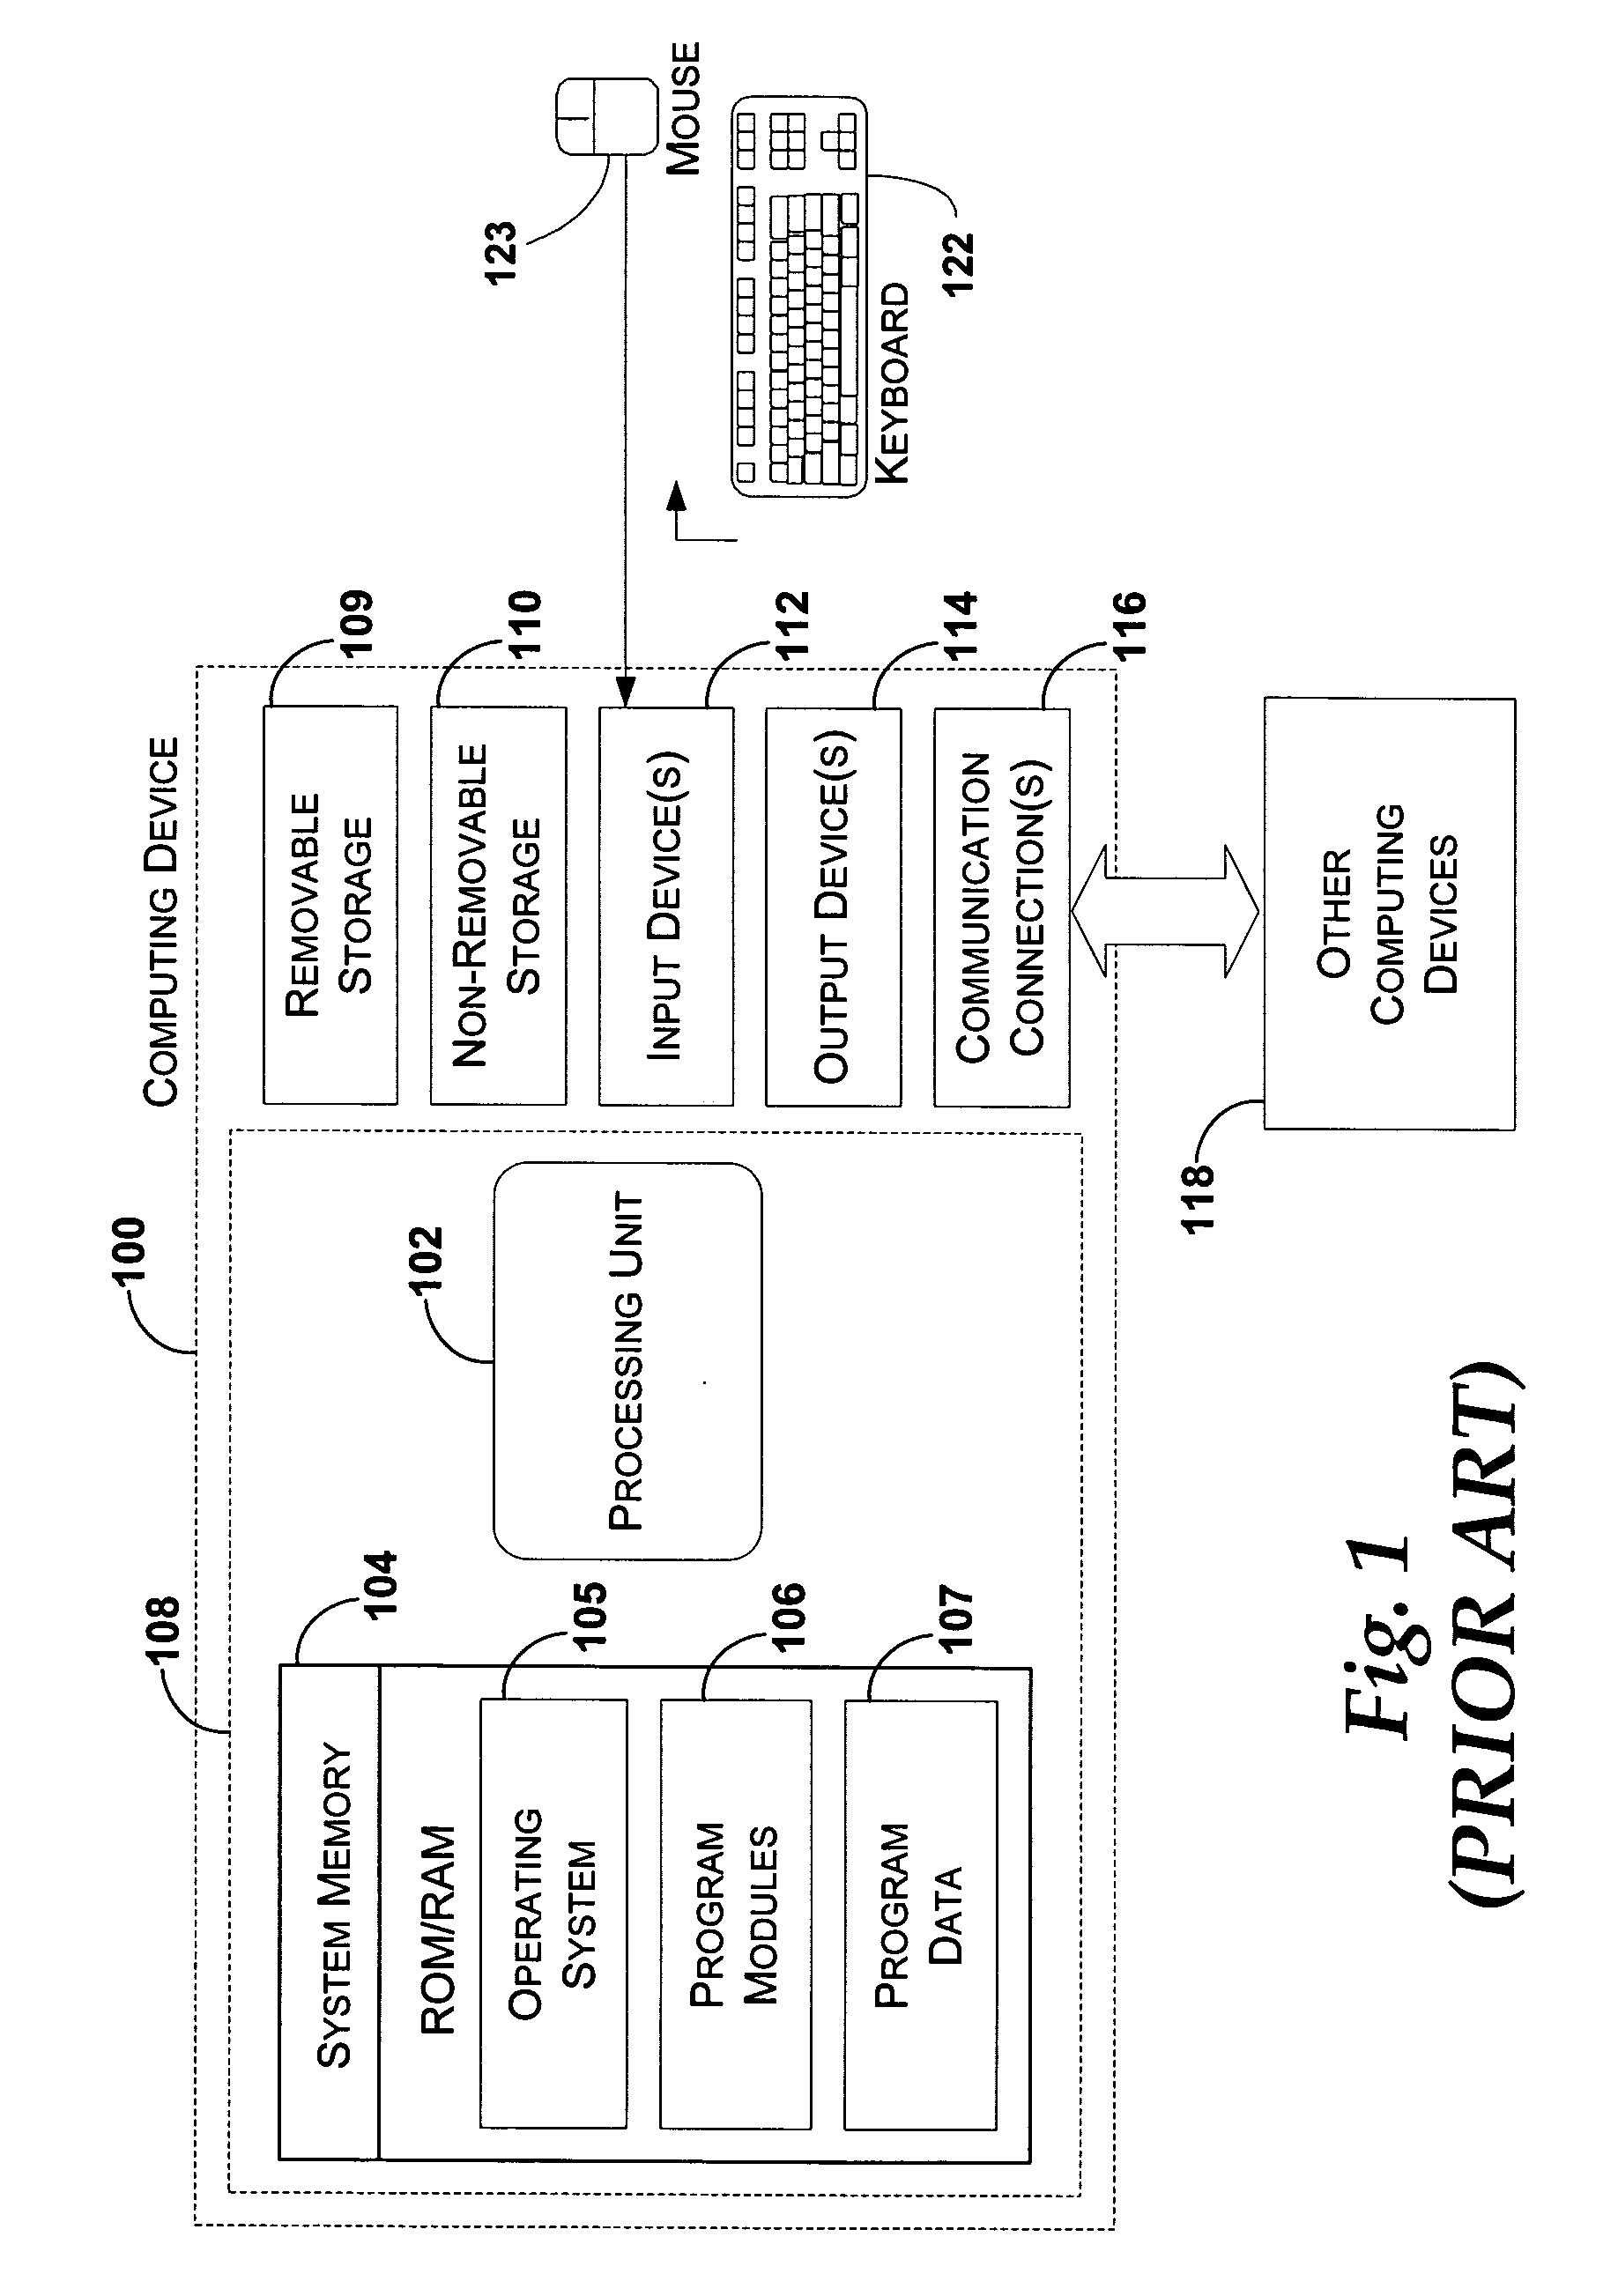 System and method for providing multiple renditions of document content